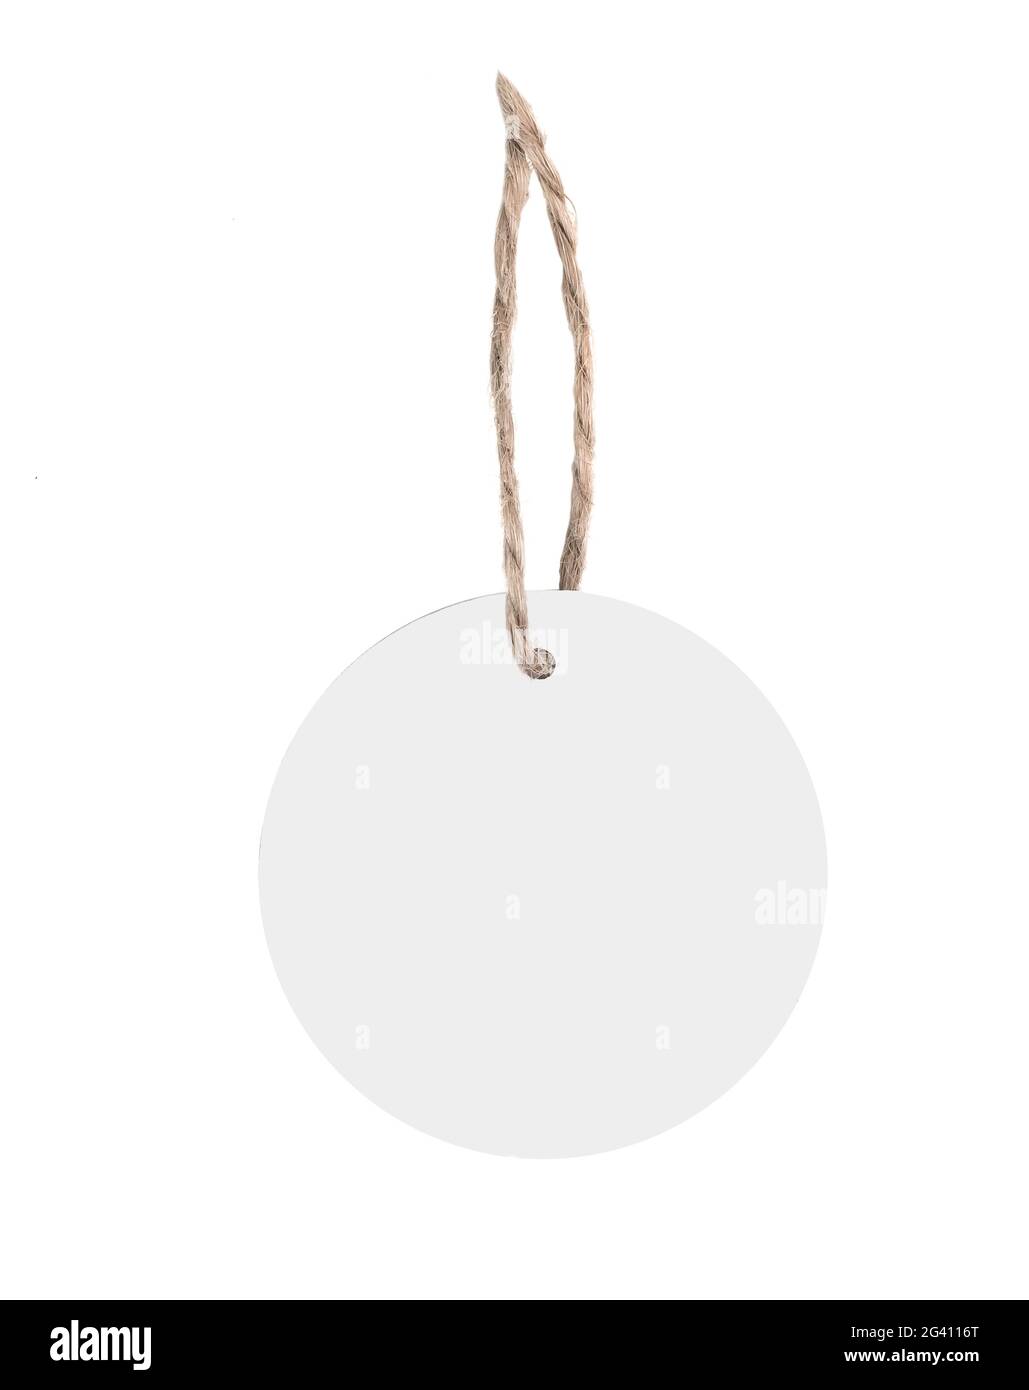 round blank cardboard label or price tag with thin rope attached on white background Stock Photo